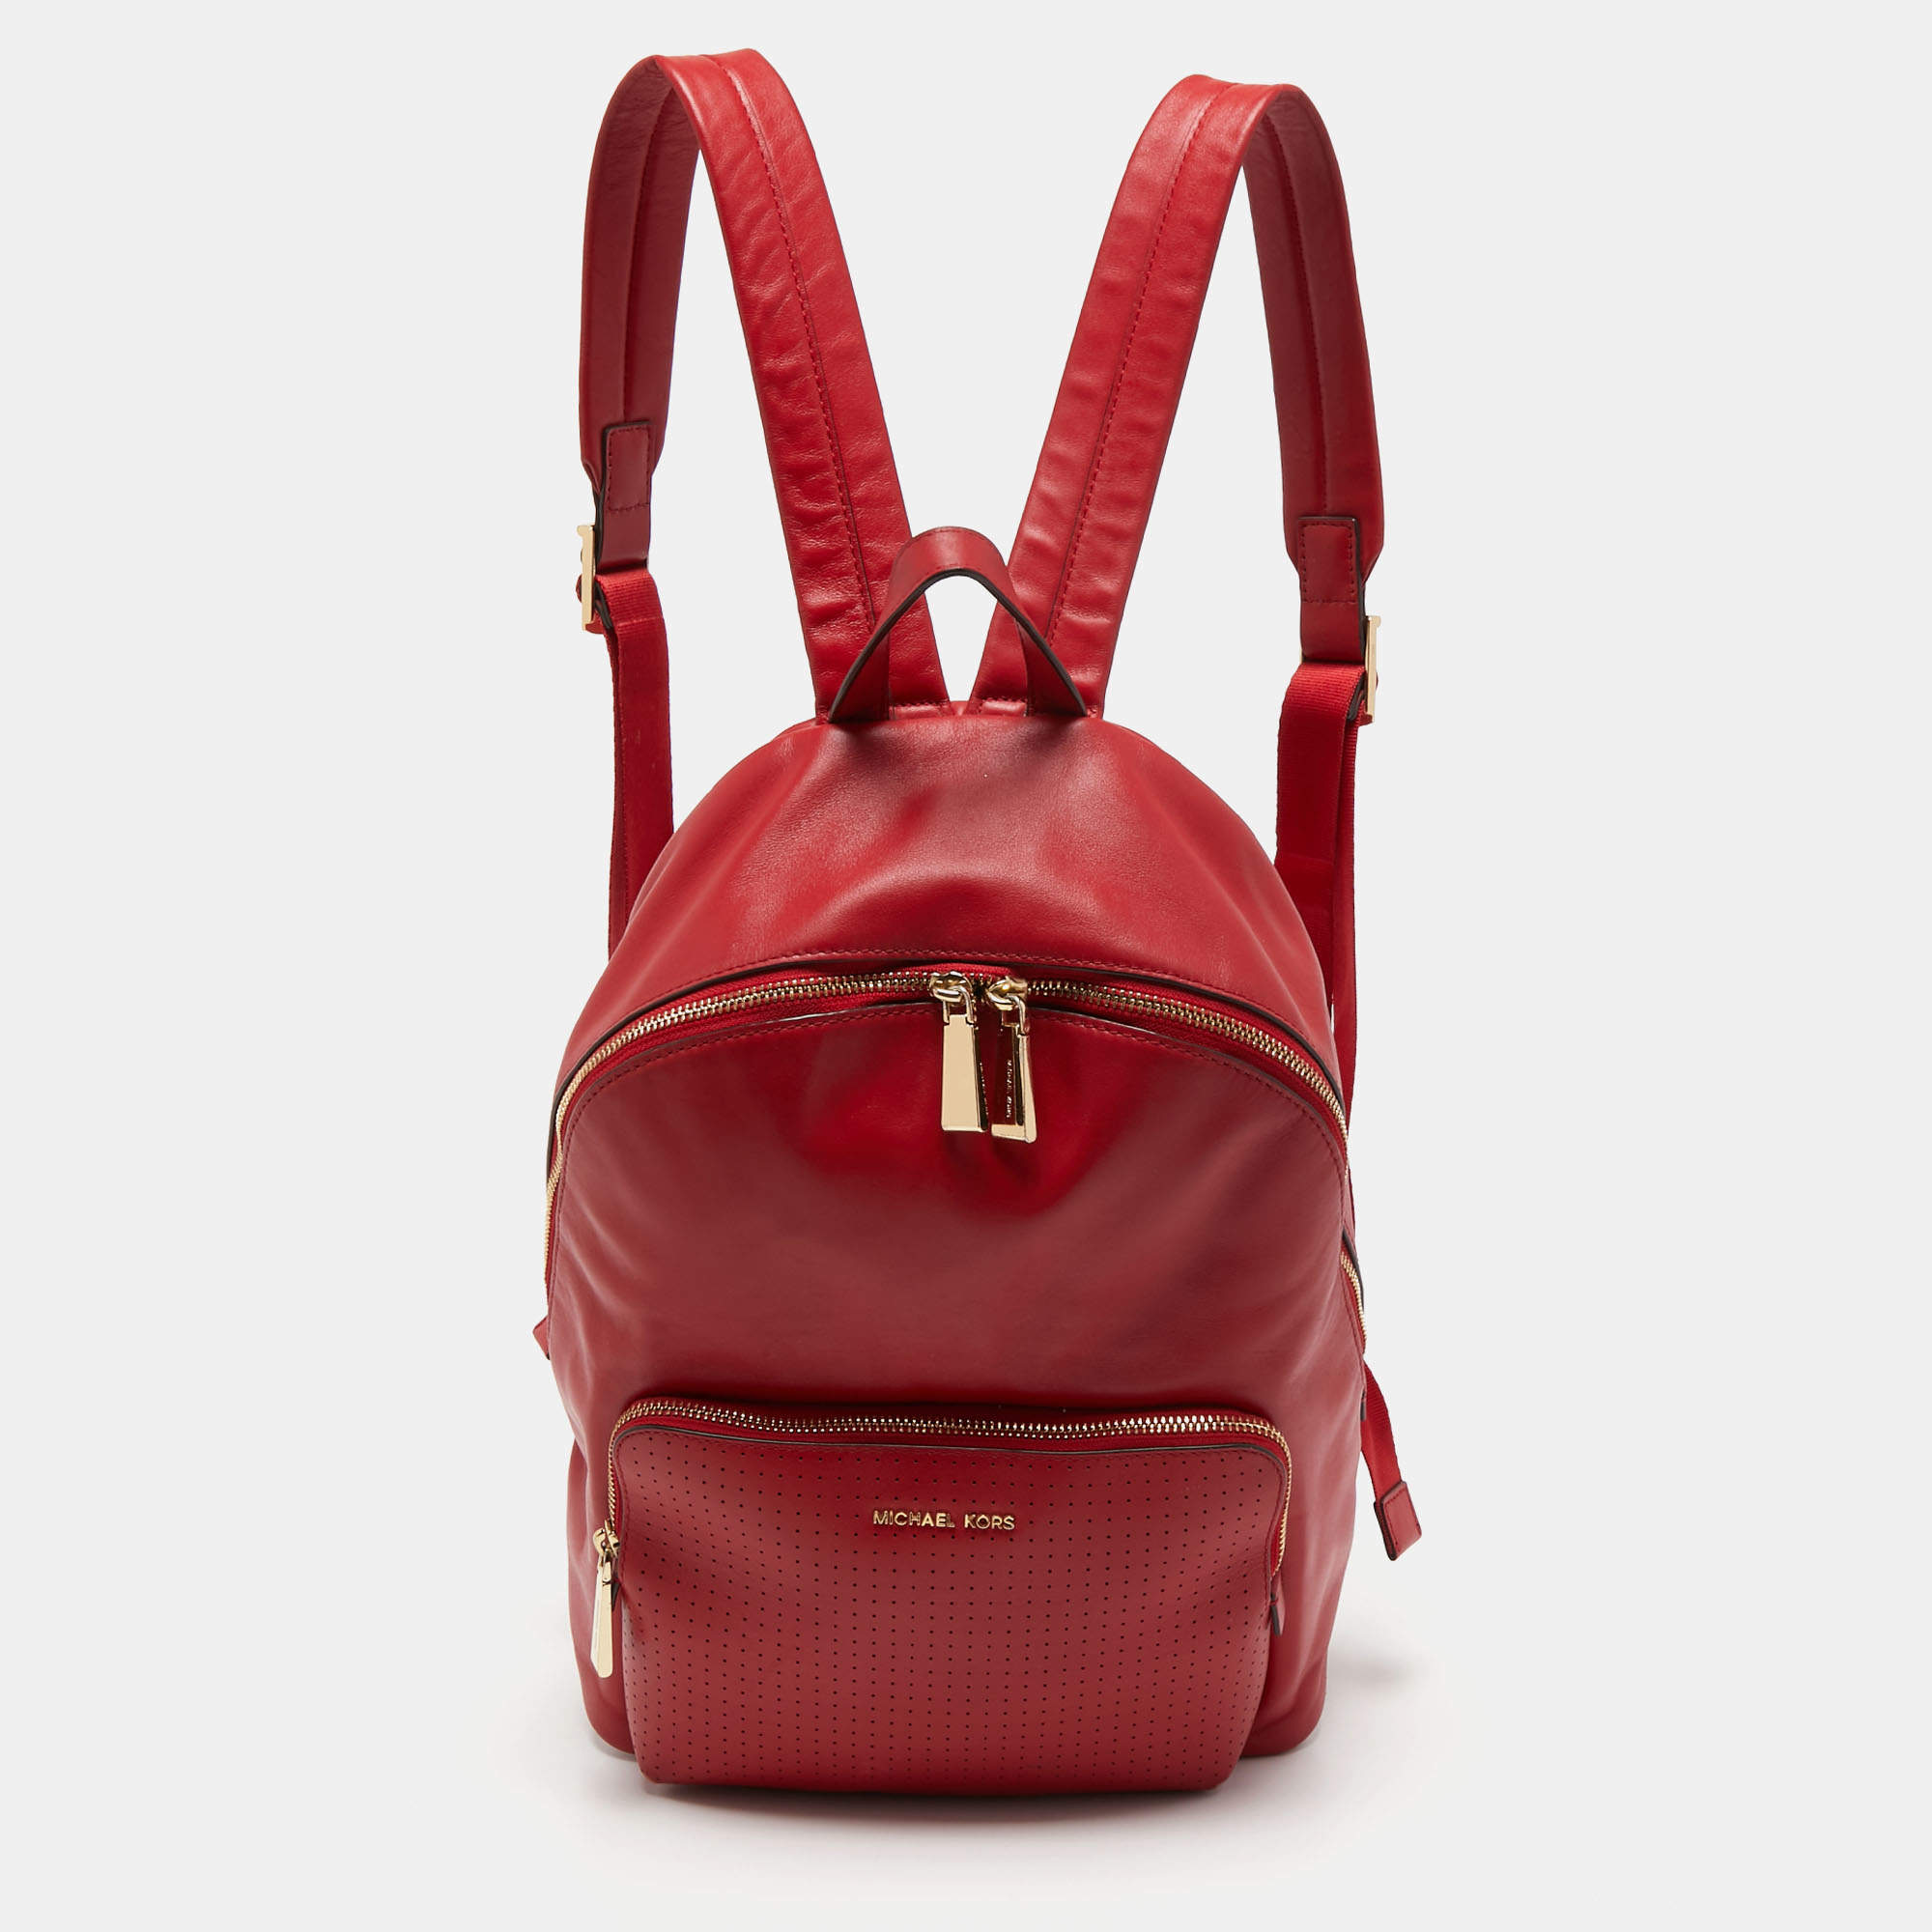 Michael Kors Red Faux Leather Perforated front Pocket Backpack Michael Kors   TLC